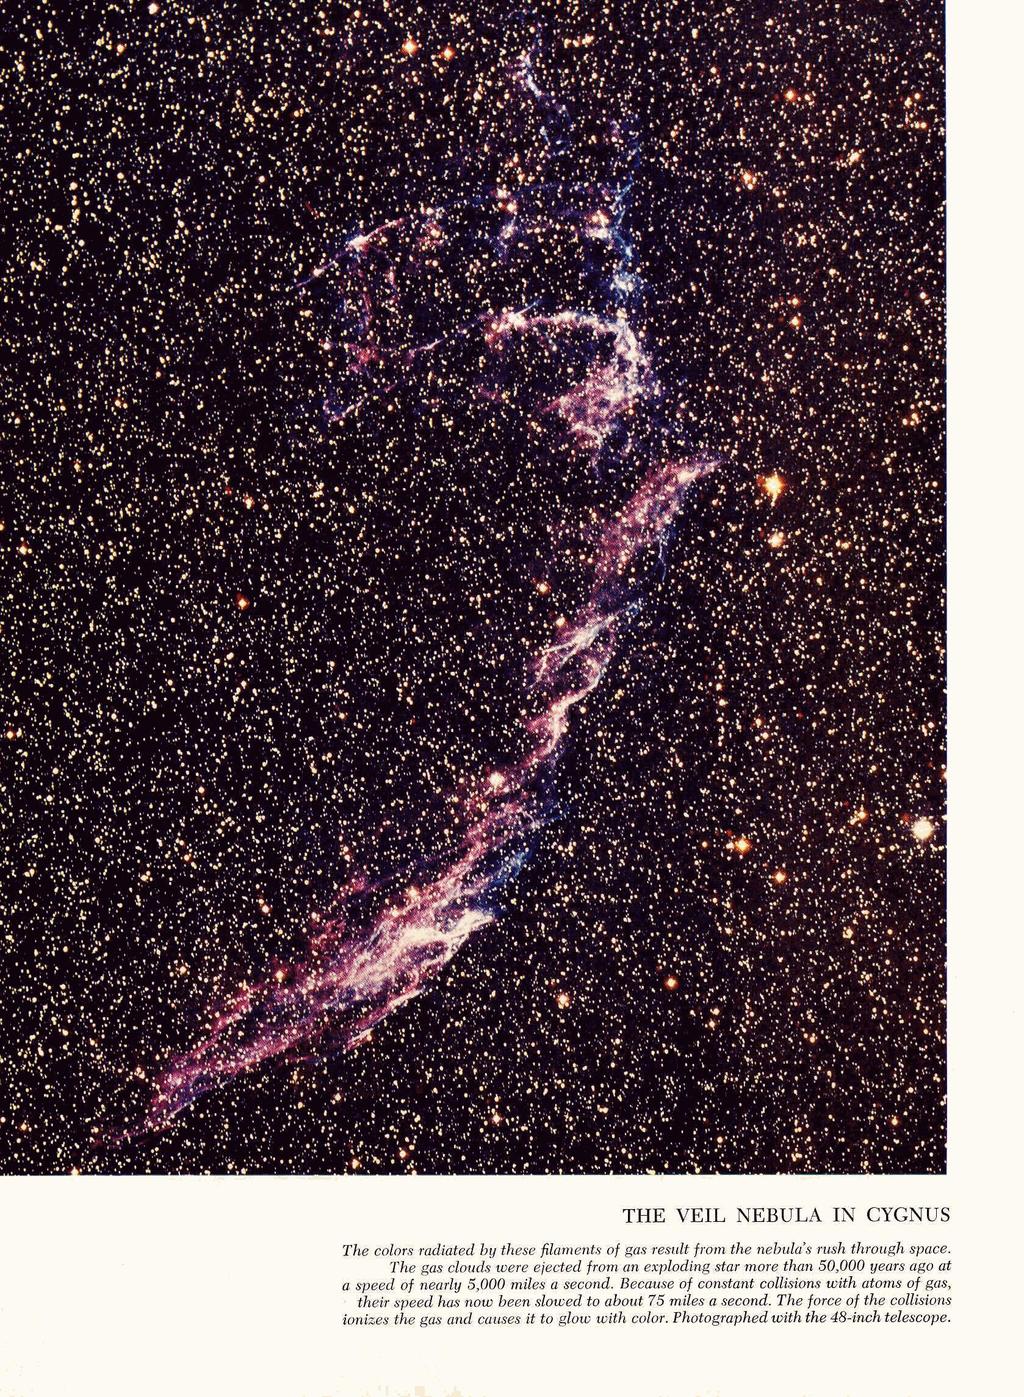 THE VEIL NEBULA IN CYGNUS The colors radiated by these filaments of gas result from the nebula's rush through space.